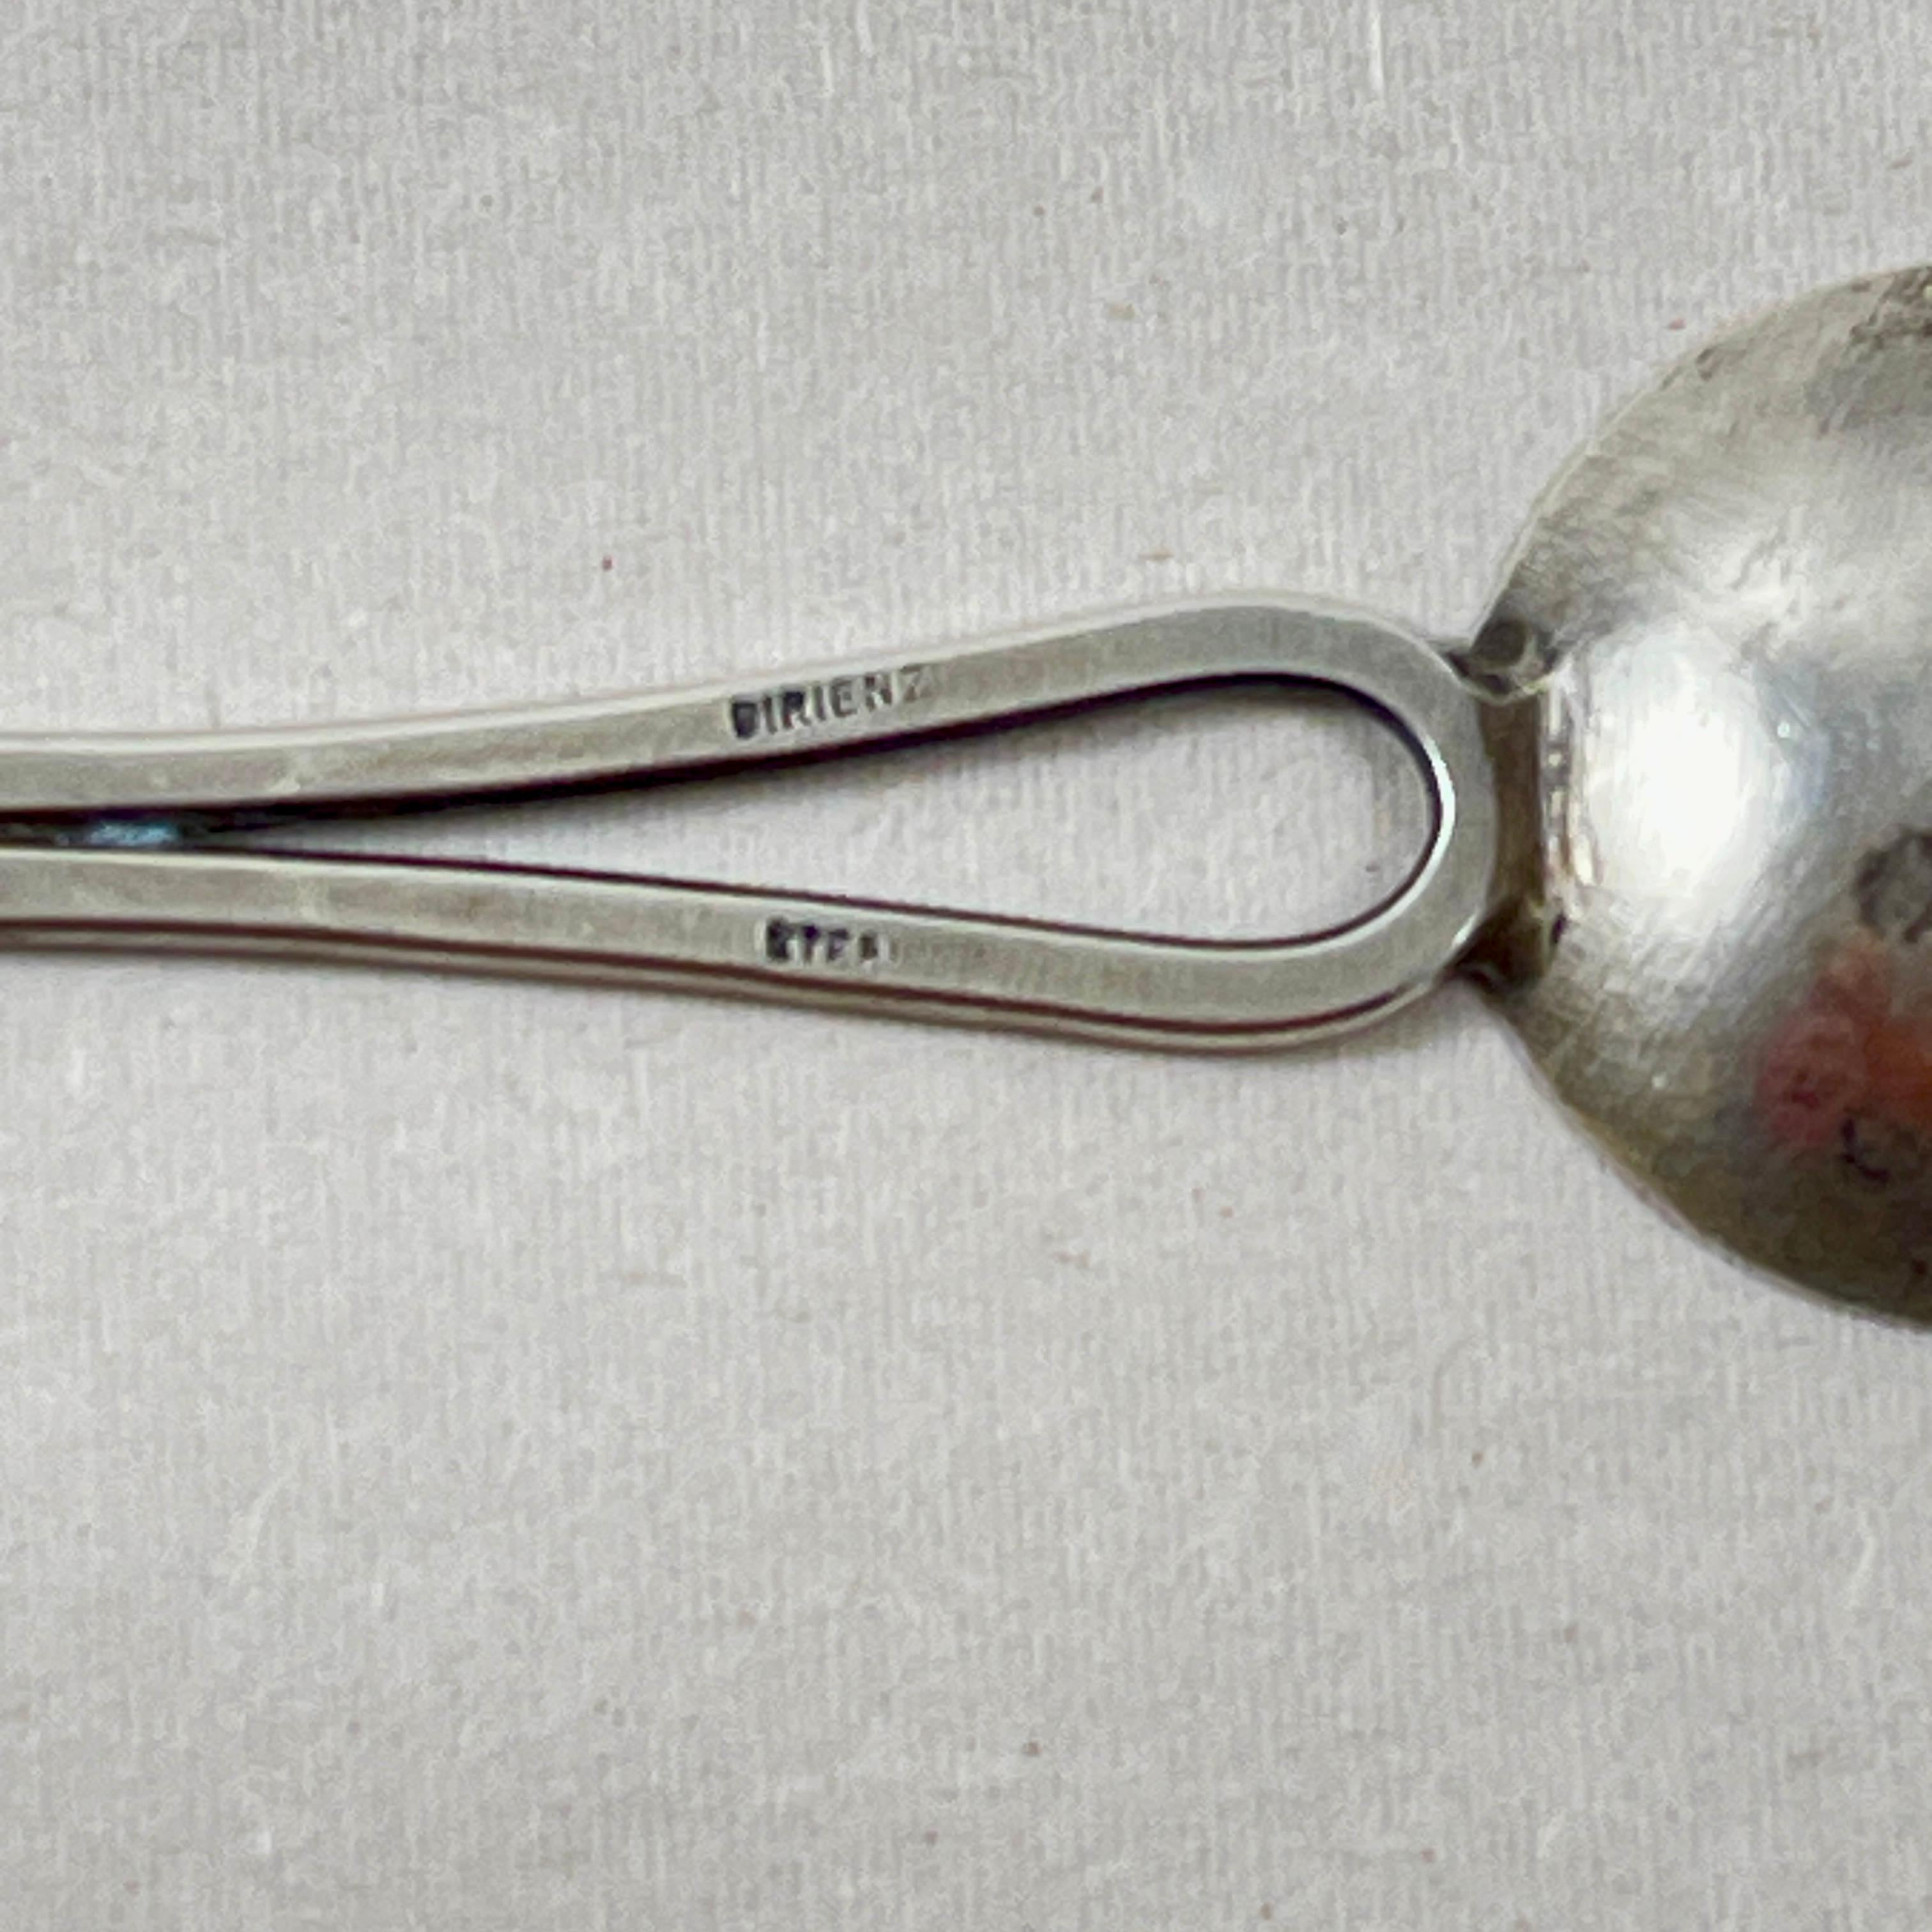 Anthony DiRienzi Silversmith Studio Hand Made Sterling Silver Spoon For Sale 2